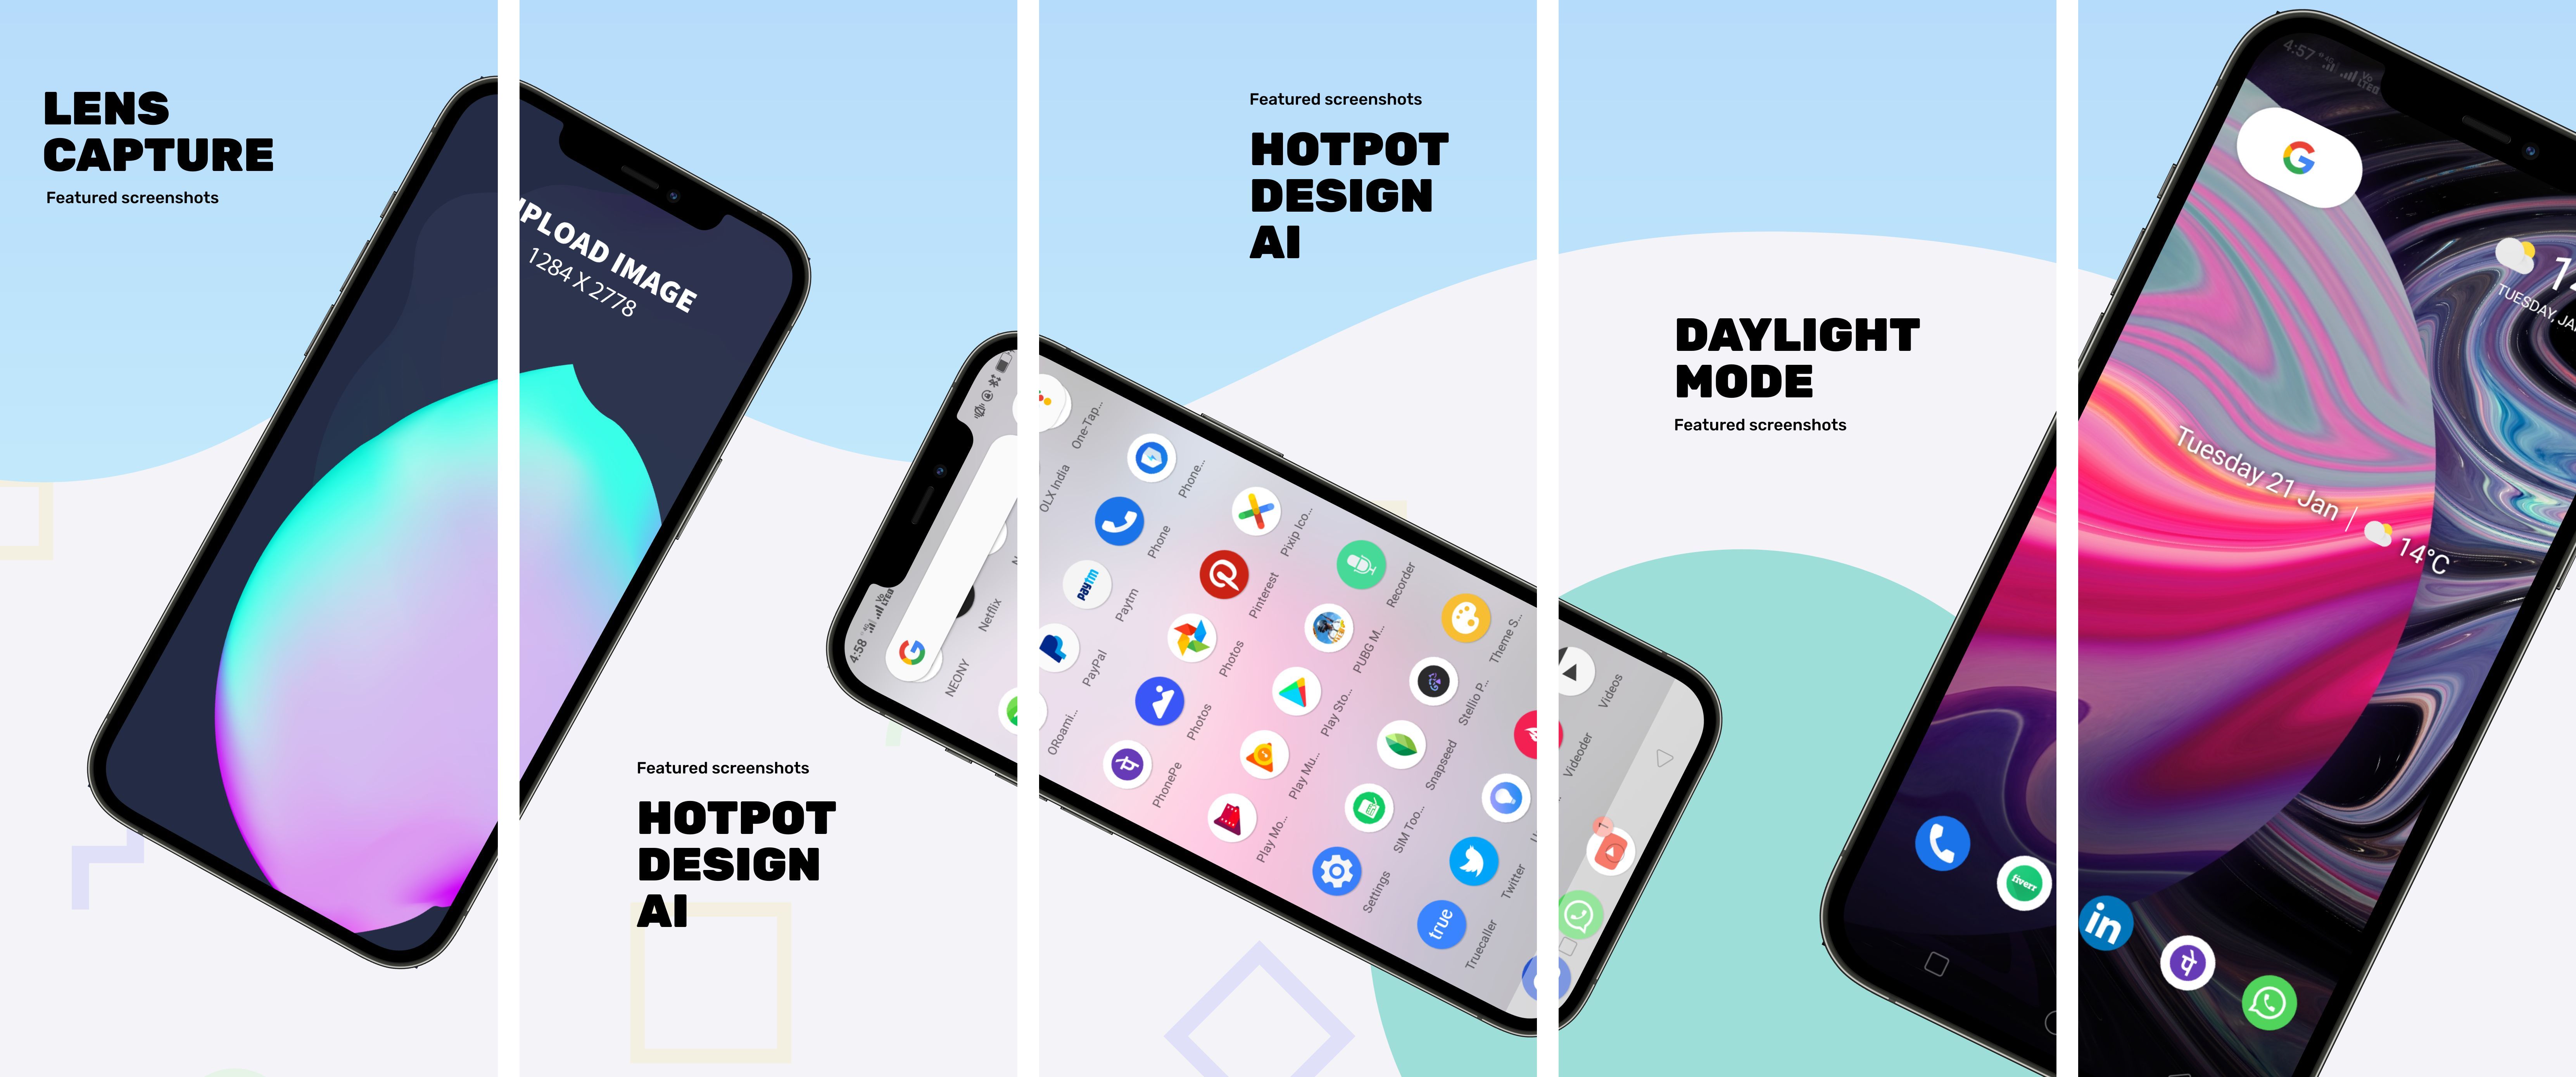 This is an App Store panorama screenshot featuring multiple iPhone XS Max devices. Brief descriptions of the app's benefits ground the panorama screenshot.